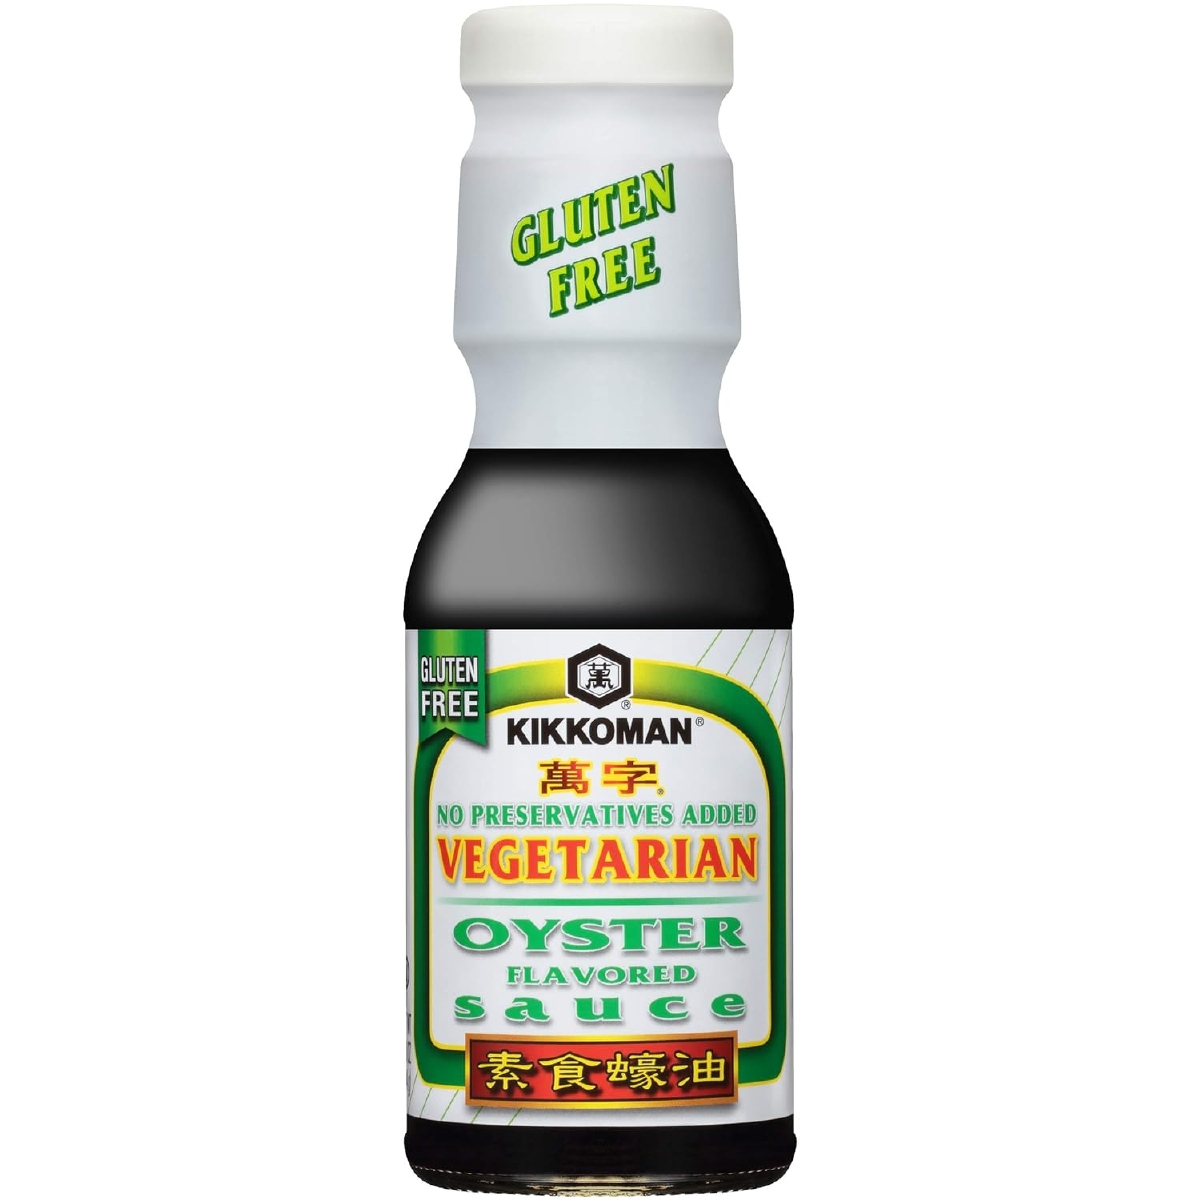 A white and green labeled bottle of Kikkoman vegetarian oyster-flavored sauce with white top on a white background. 